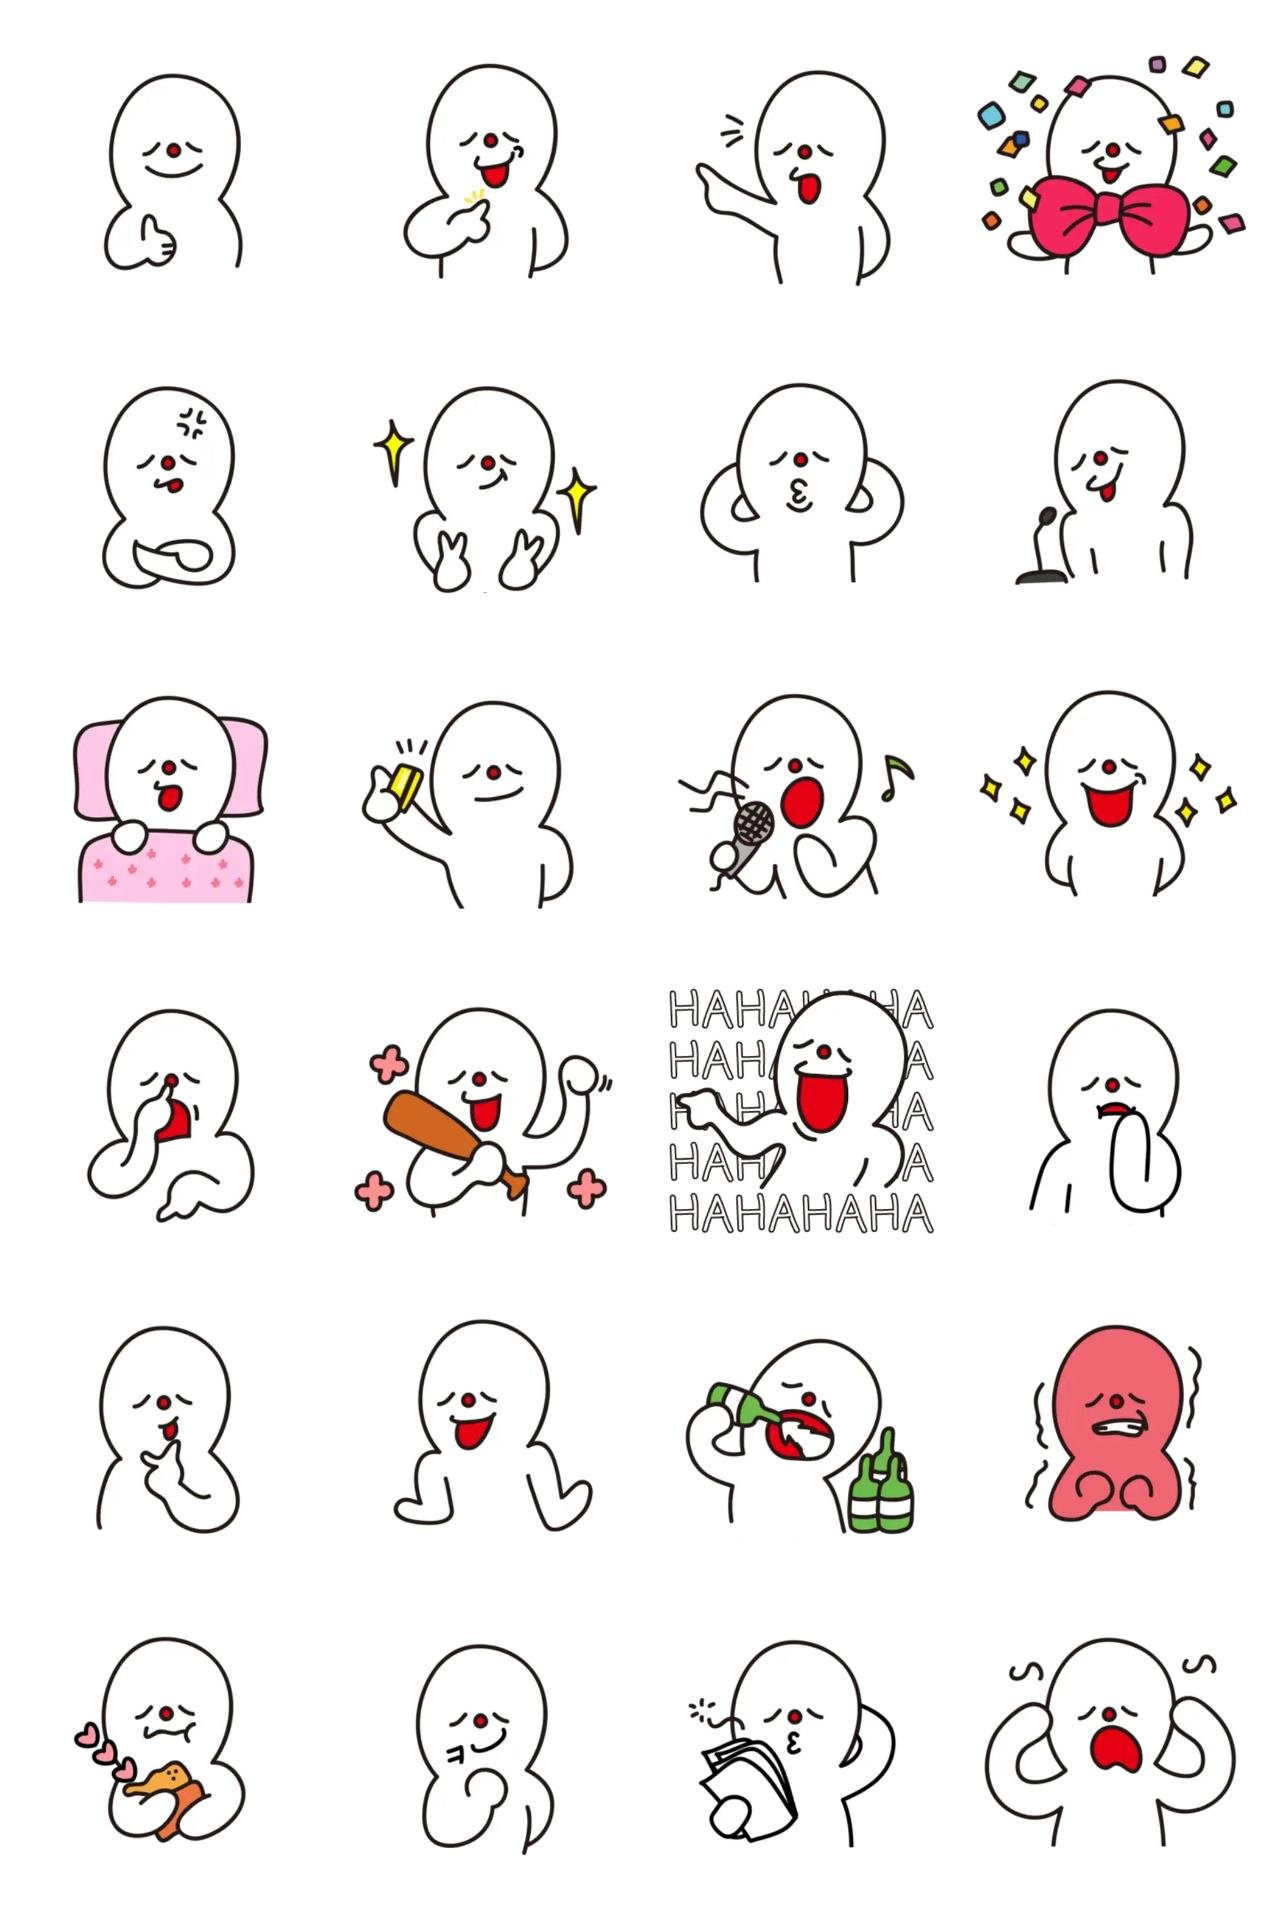 I'm going to live without thinking. Etc. sticker pack for Whatsapp, Telegram, Signal, and others chatting and message apps